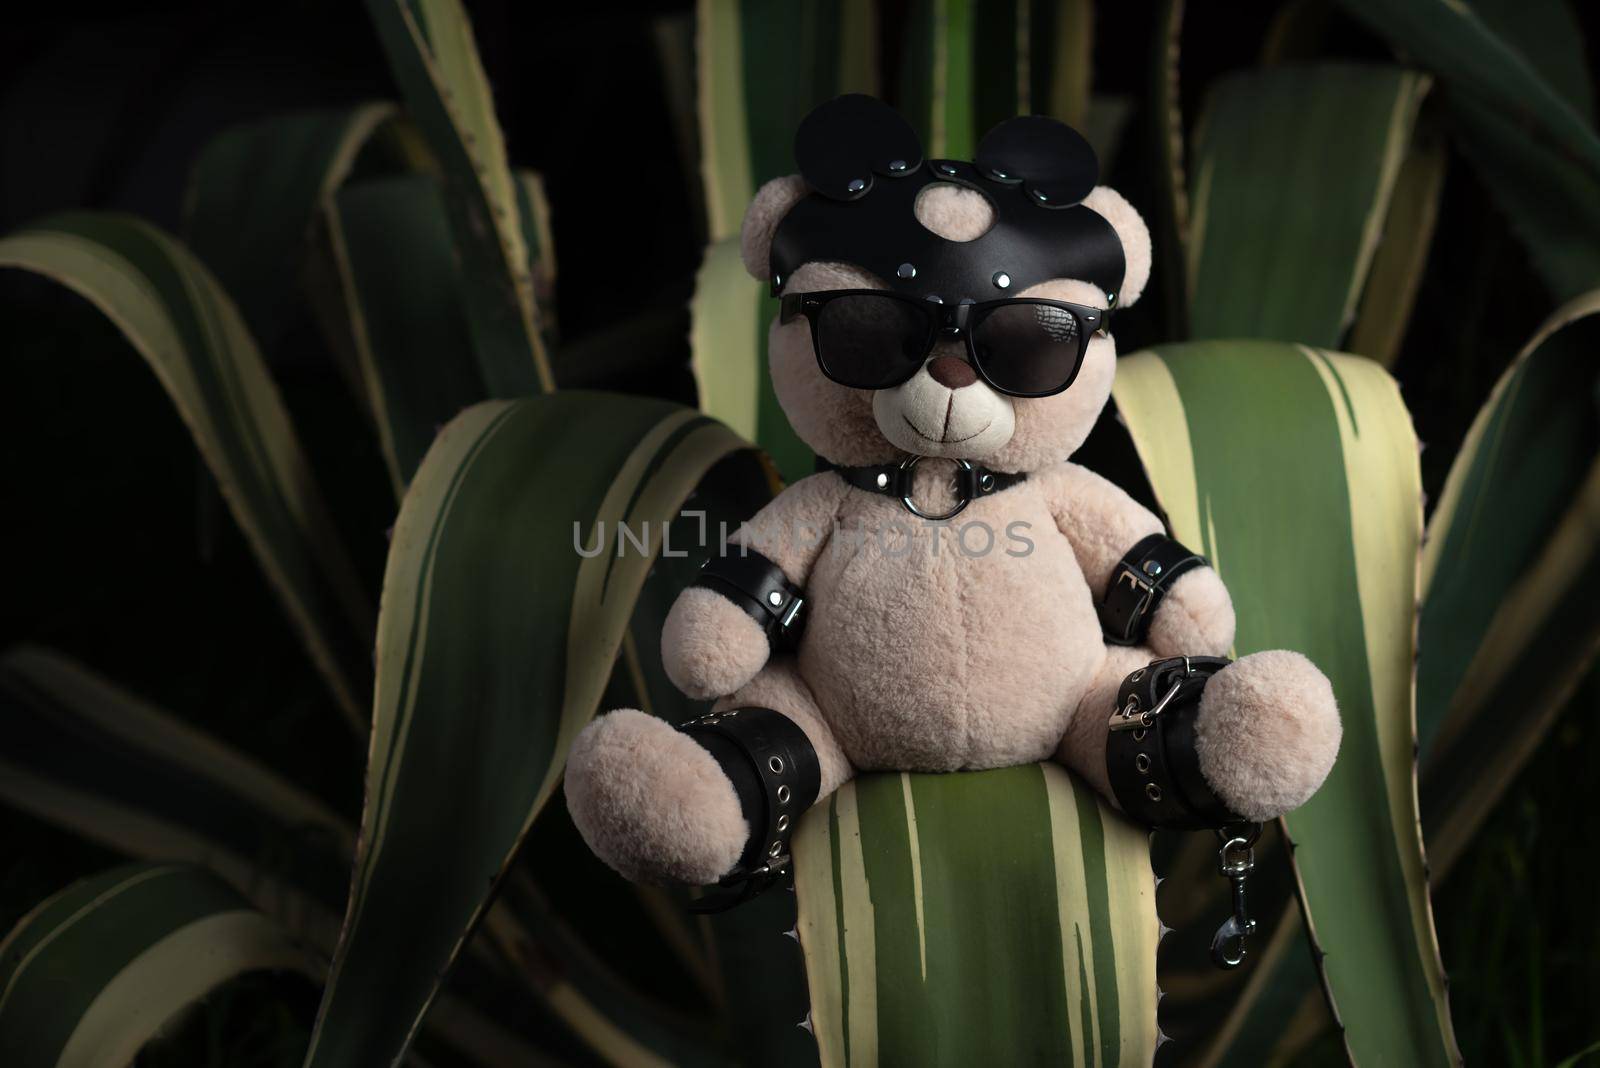 BDSM teddy bear in leather straps and mask accessory for sex games on a prickly southern cactus by Rotozey